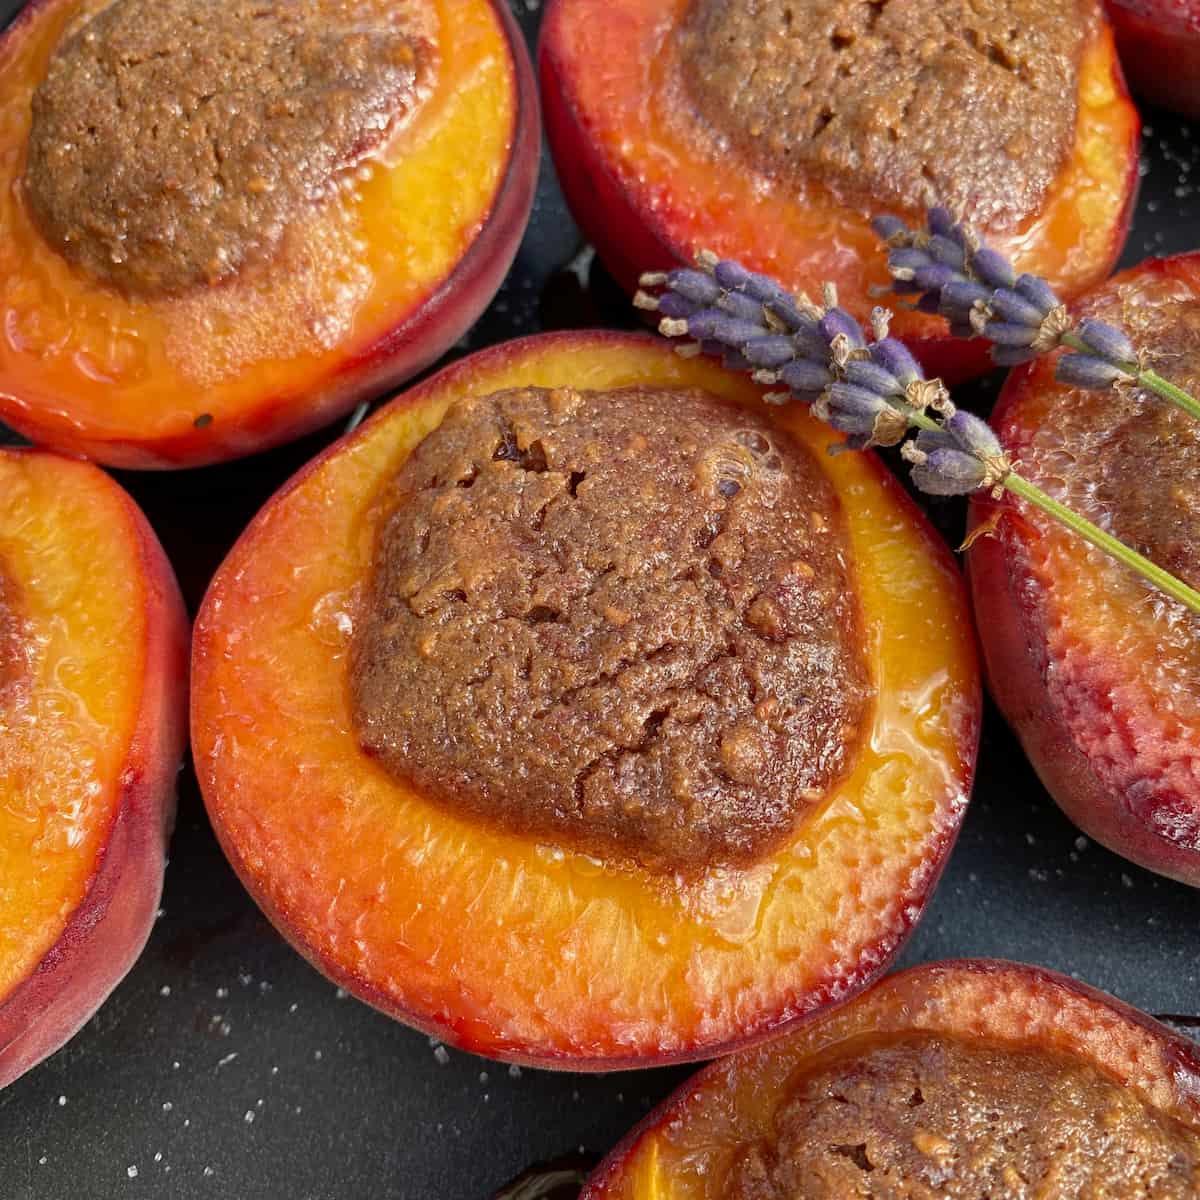 peach halves baked in the oven and stuffed with Italian amaretti